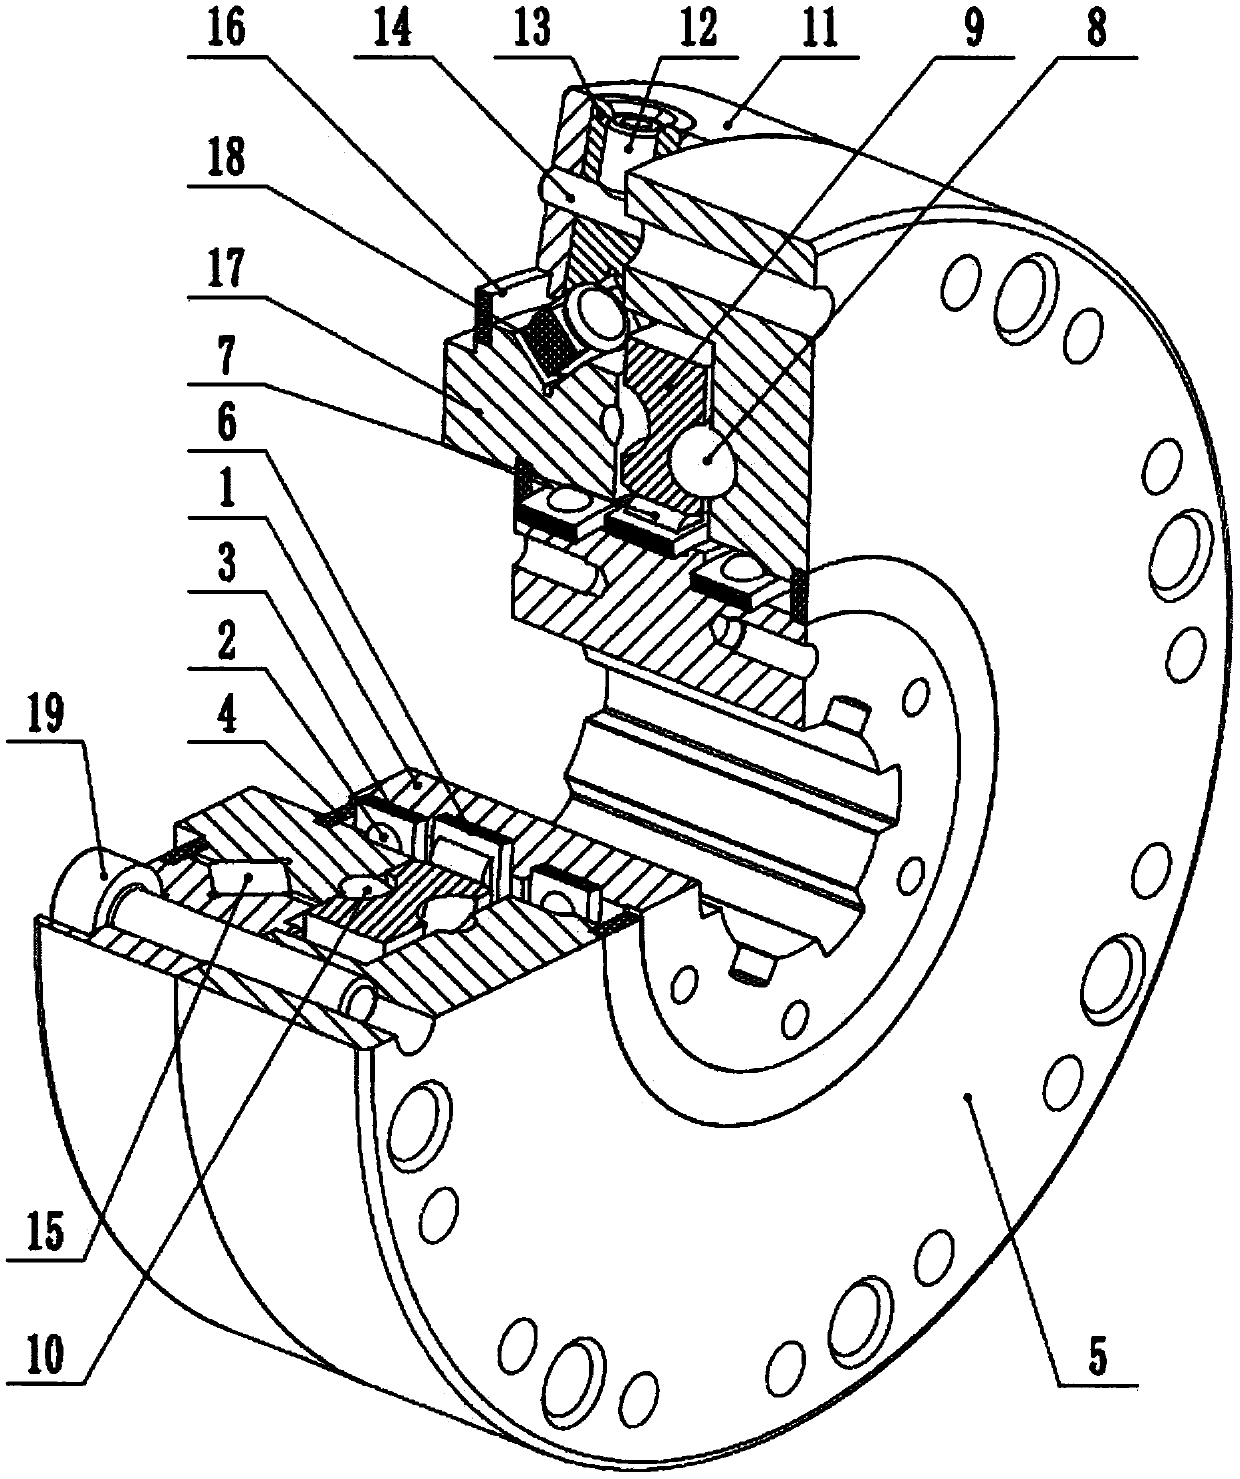 Two-stage closed-type undercutting cycloid movable tooth reduction gear